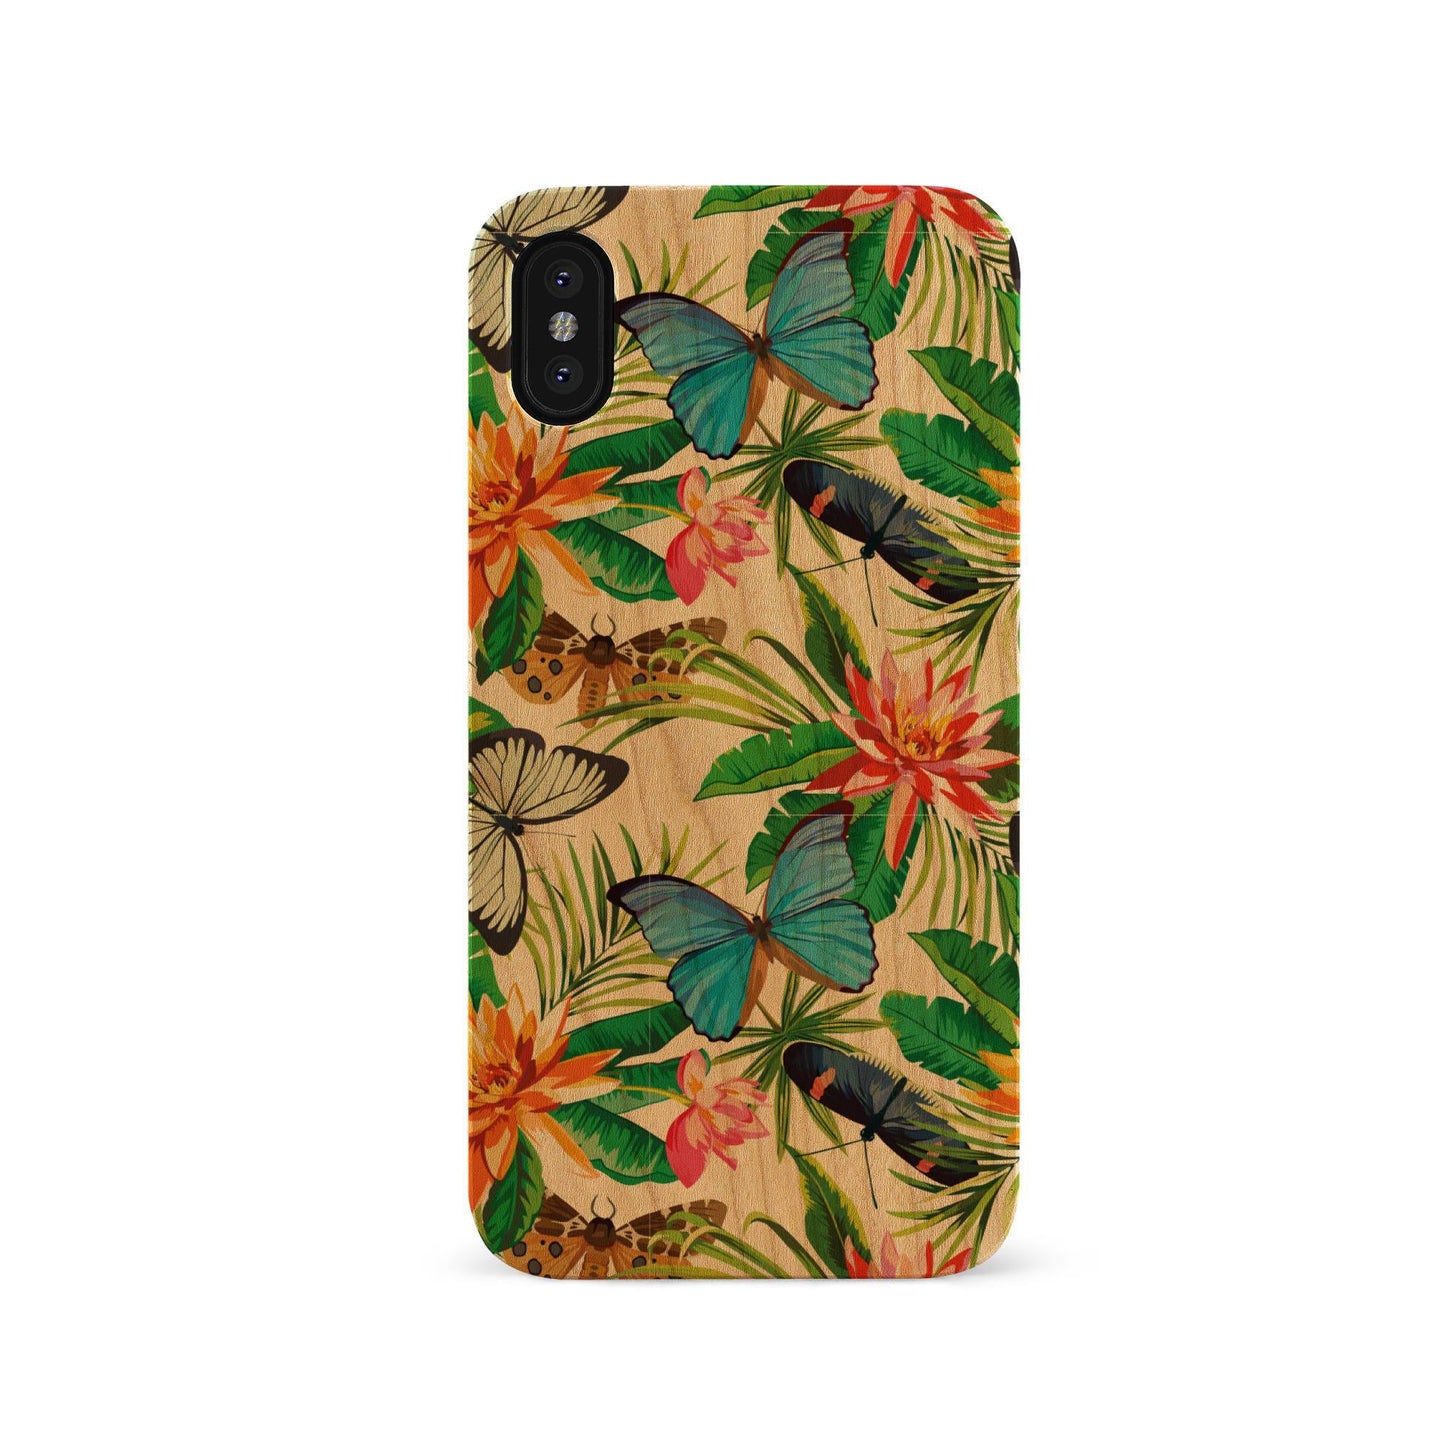 Flower Butterfly UV Colored Wood - Case Yard USA